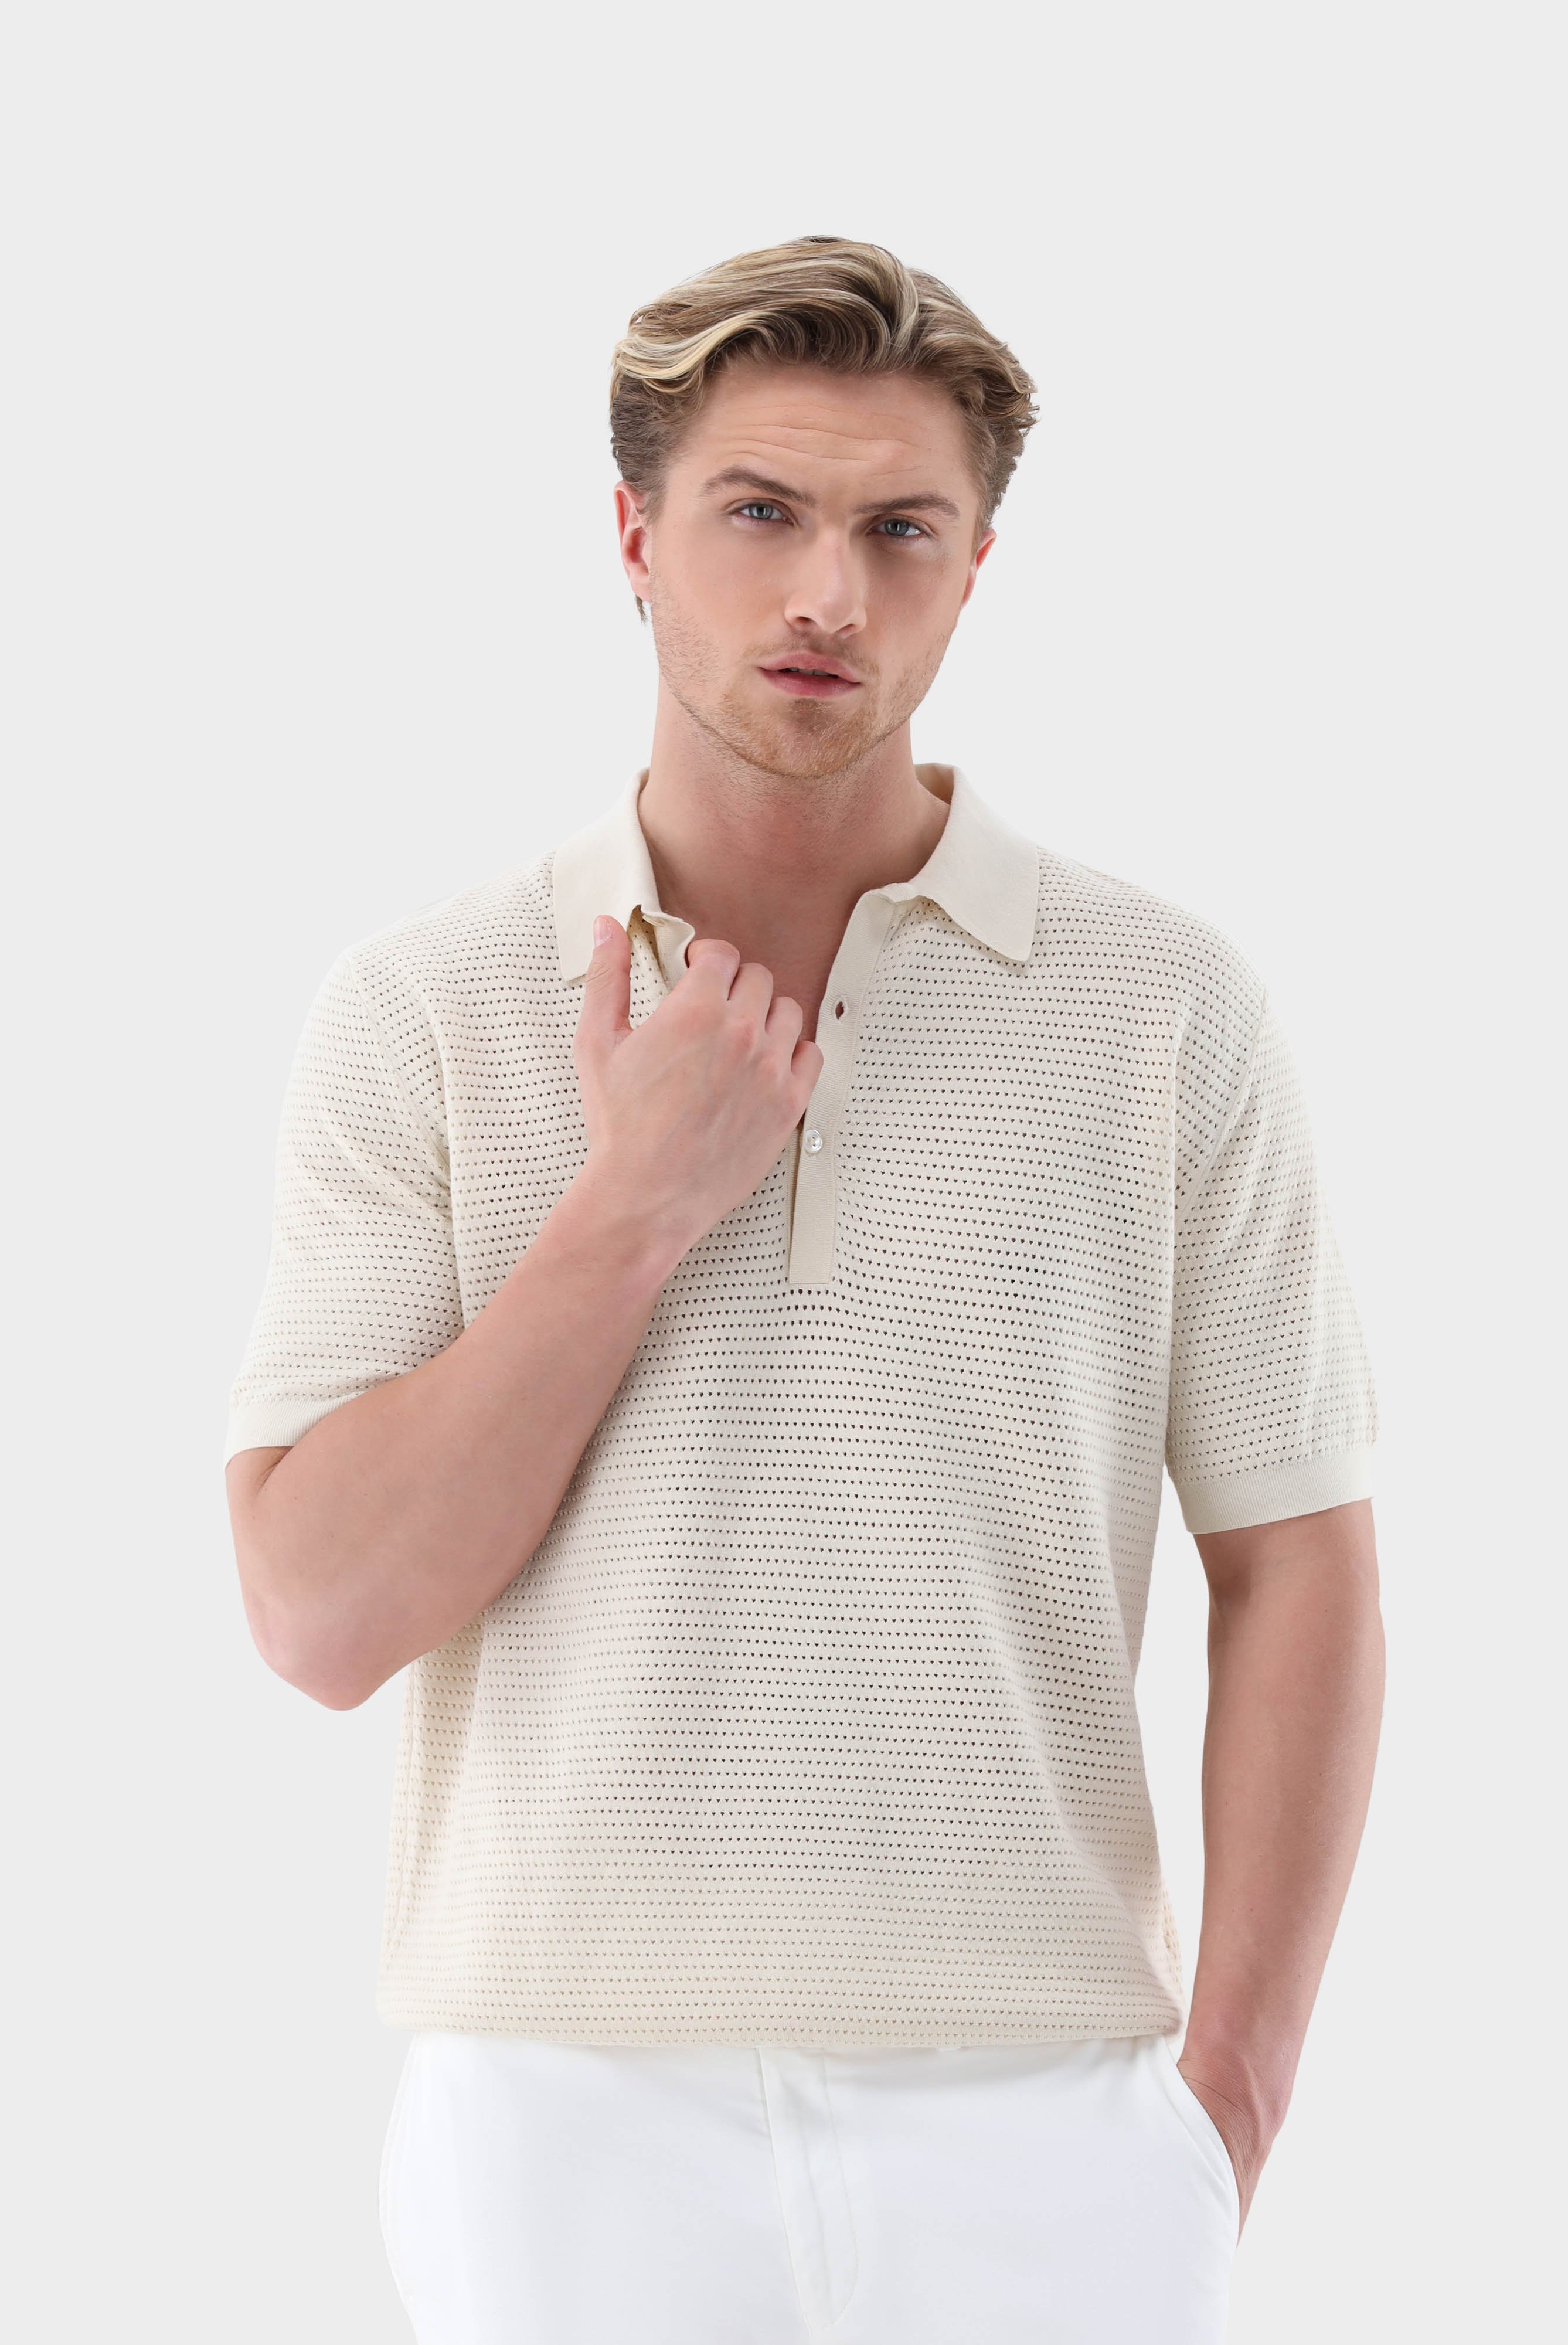 Poloshirts+Polo Shirt with Mesh Structure in Air Cotton+82.8651..S00267.120.S